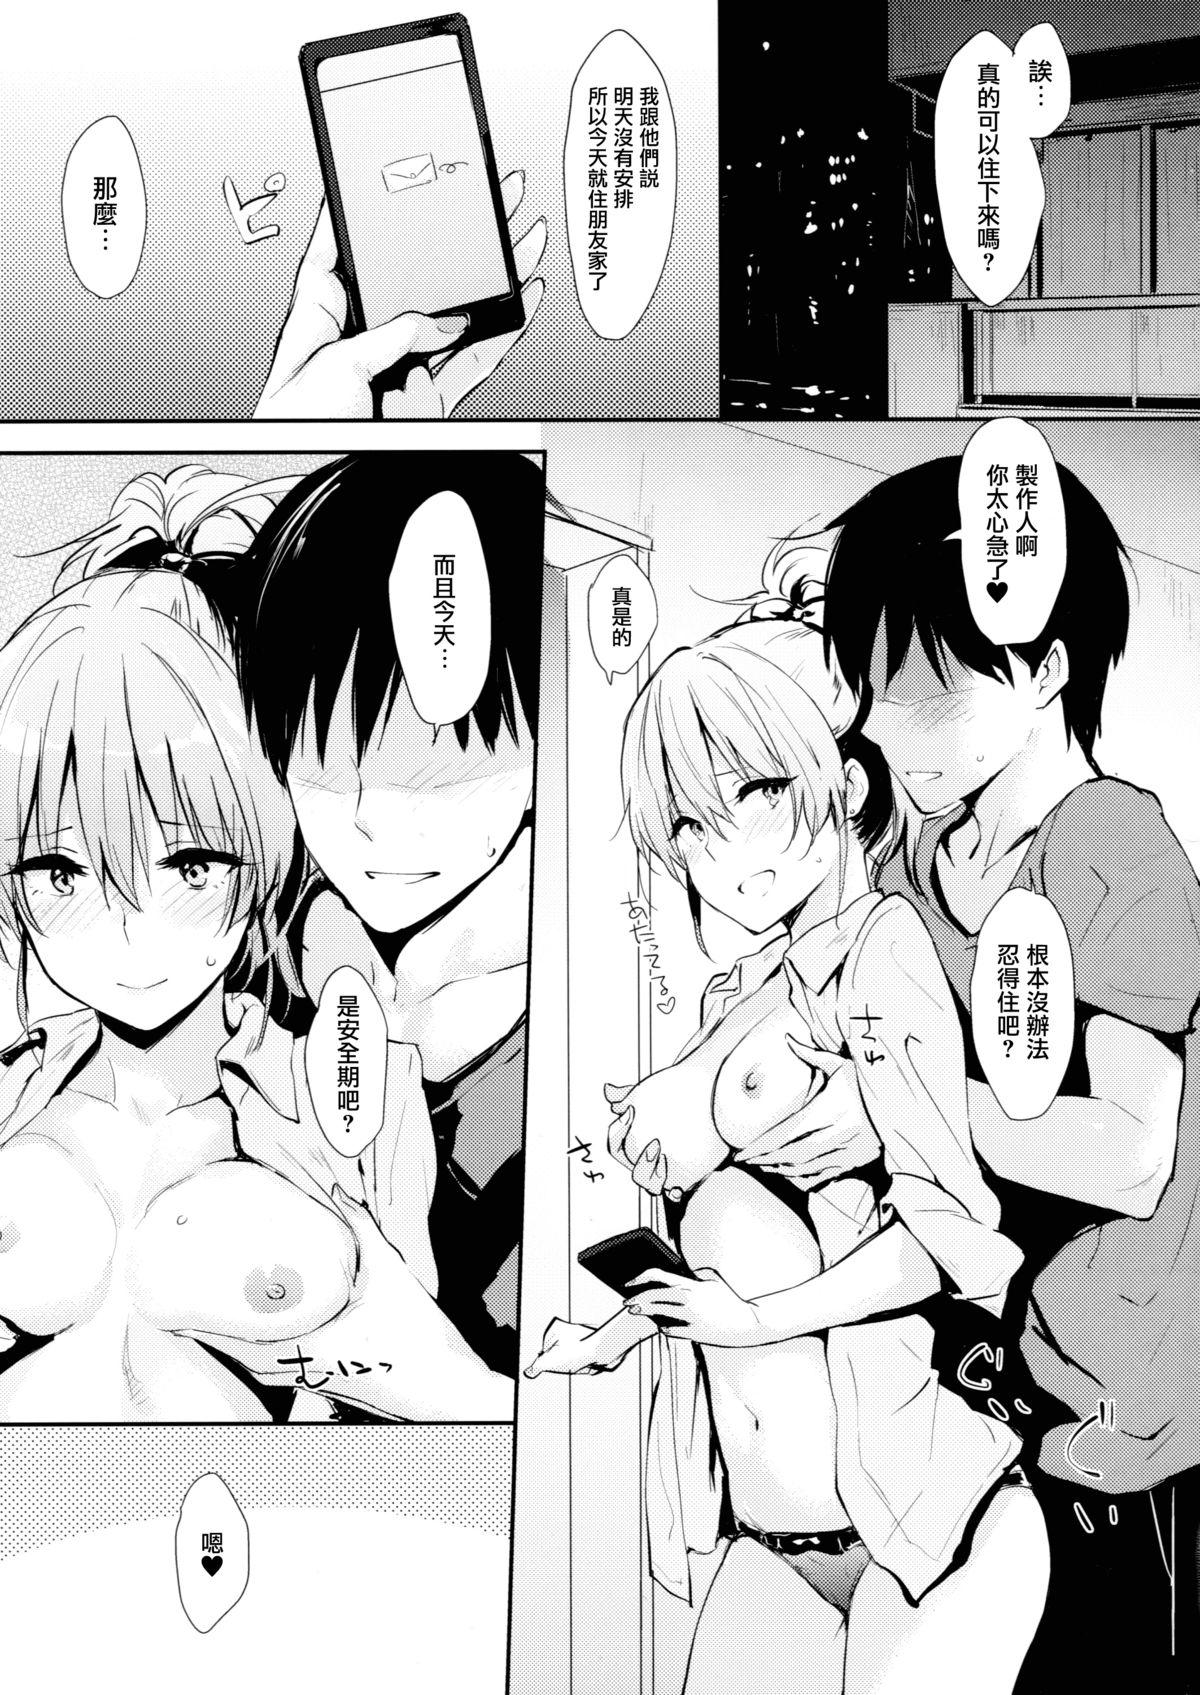 Dirty Talk Mika-ppoi no! 2 - The idolmaster Asiansex - Page 4